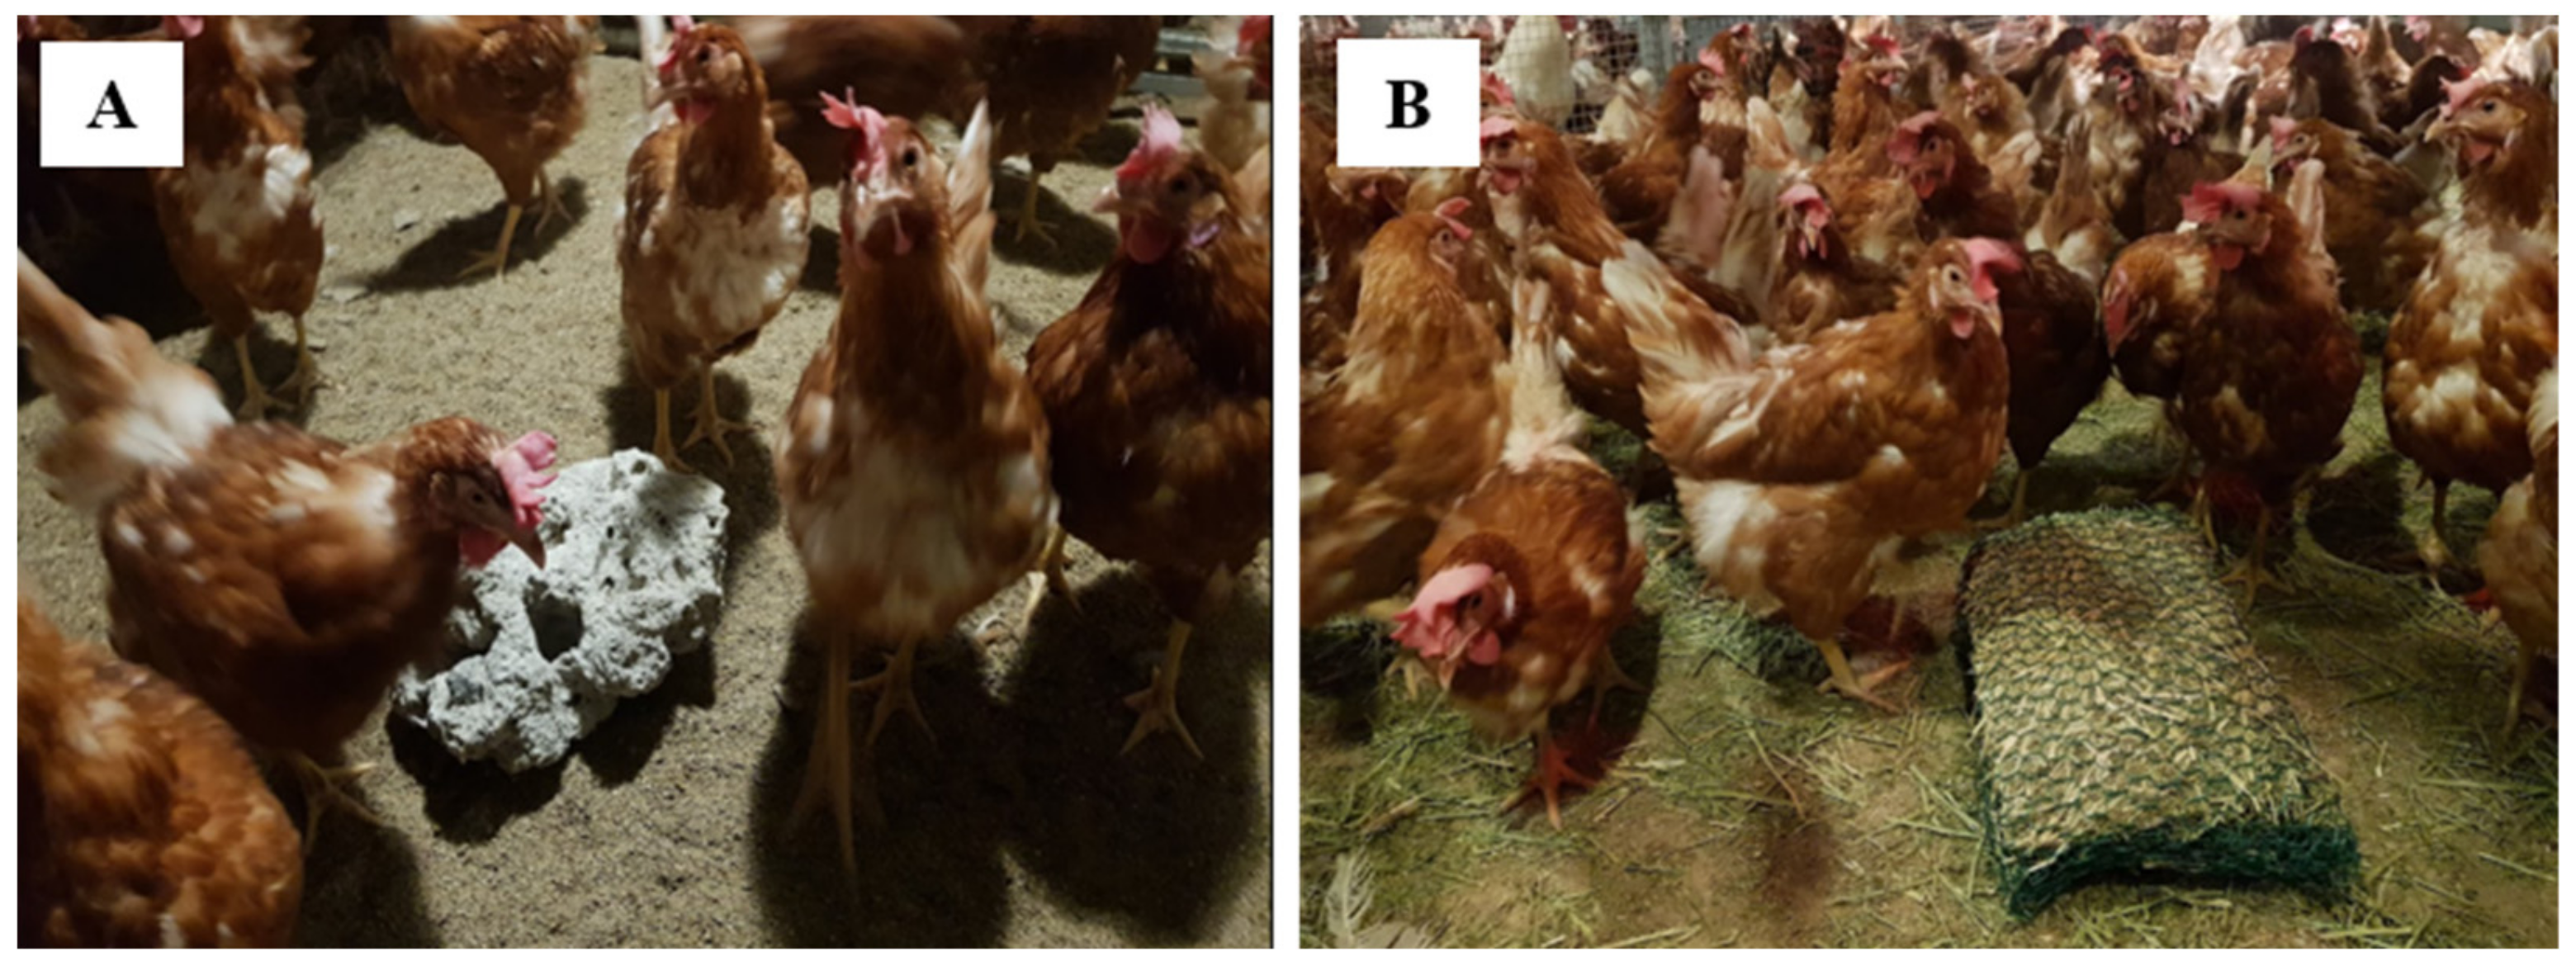 Animals | Free Full-Text | Effect of Providing Environmental Enrichment  into Aviary House on the Welfare of Laying Hens